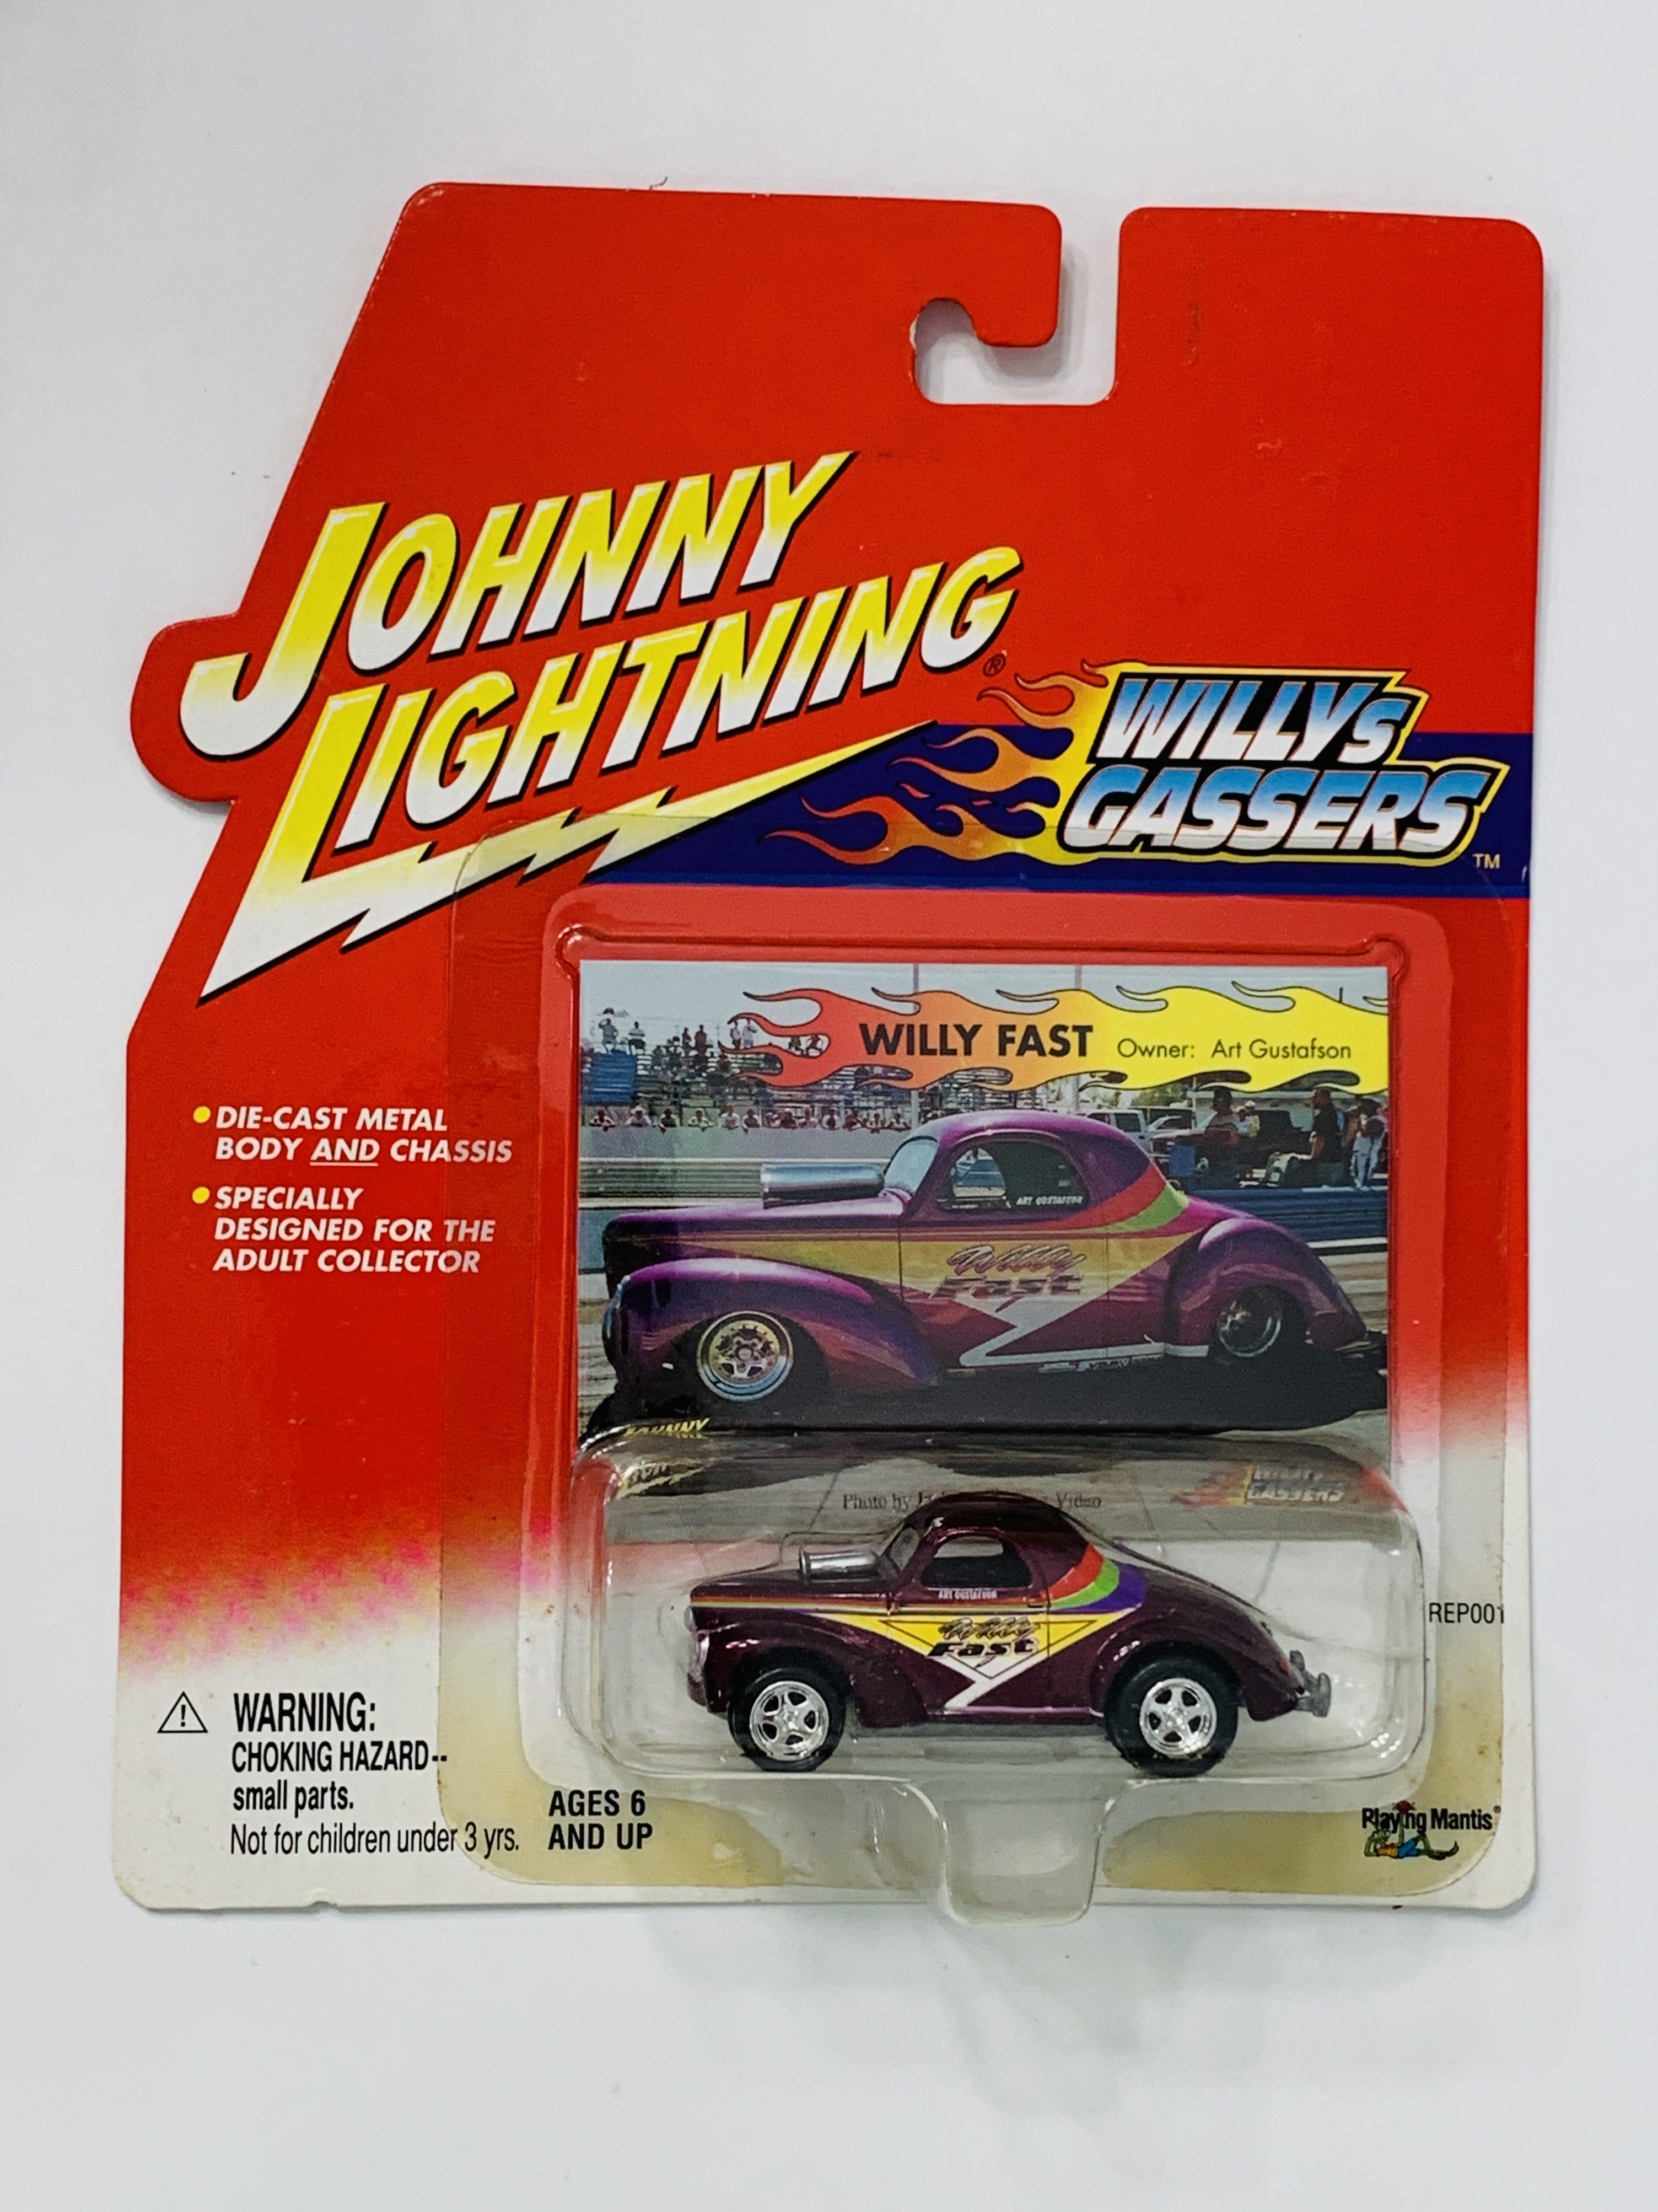 Johnny Lightning Willys Gassers Willy Fast